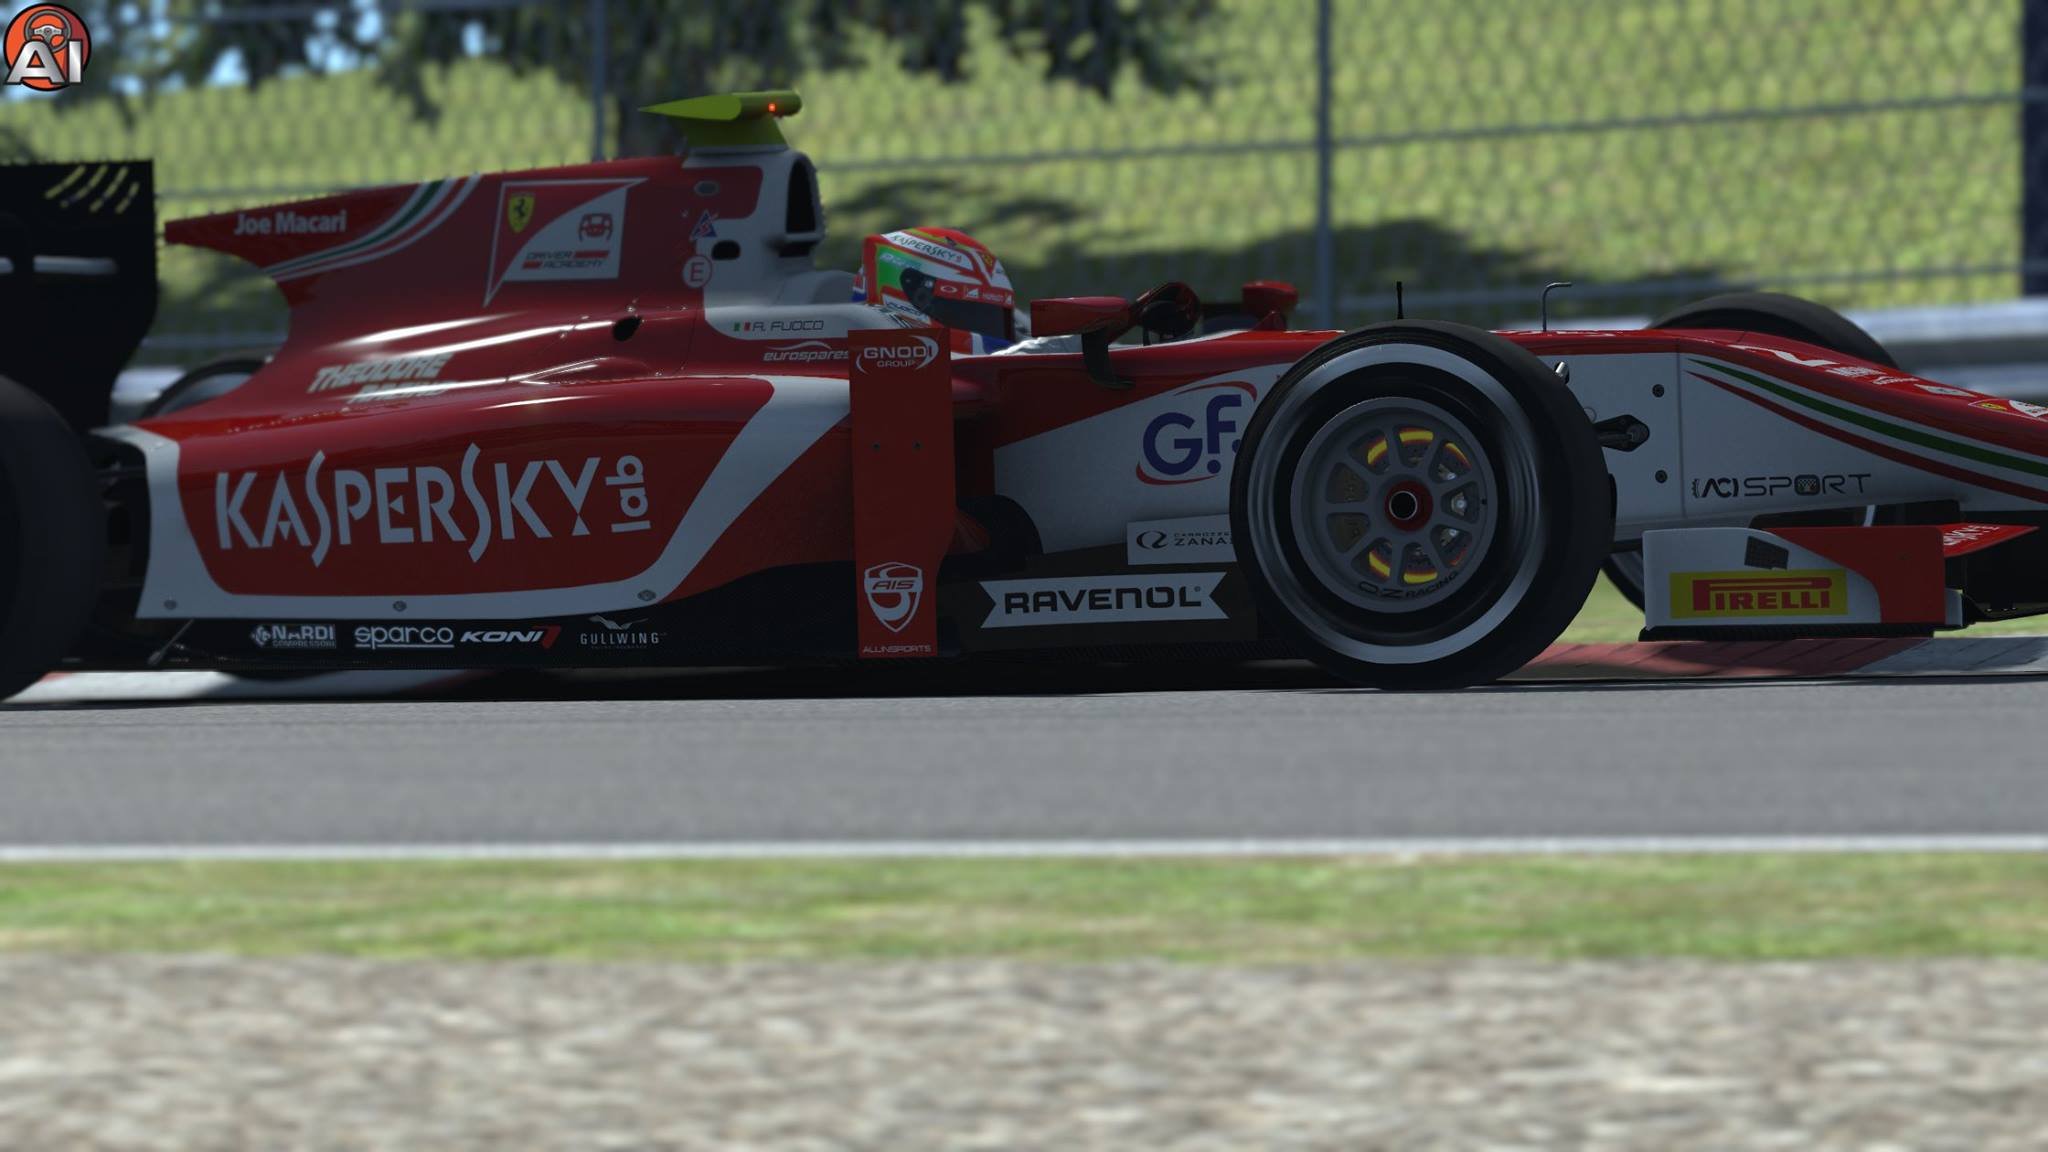 More information about "rFactor 2: la F2 by ASR Formula si presenta in video"